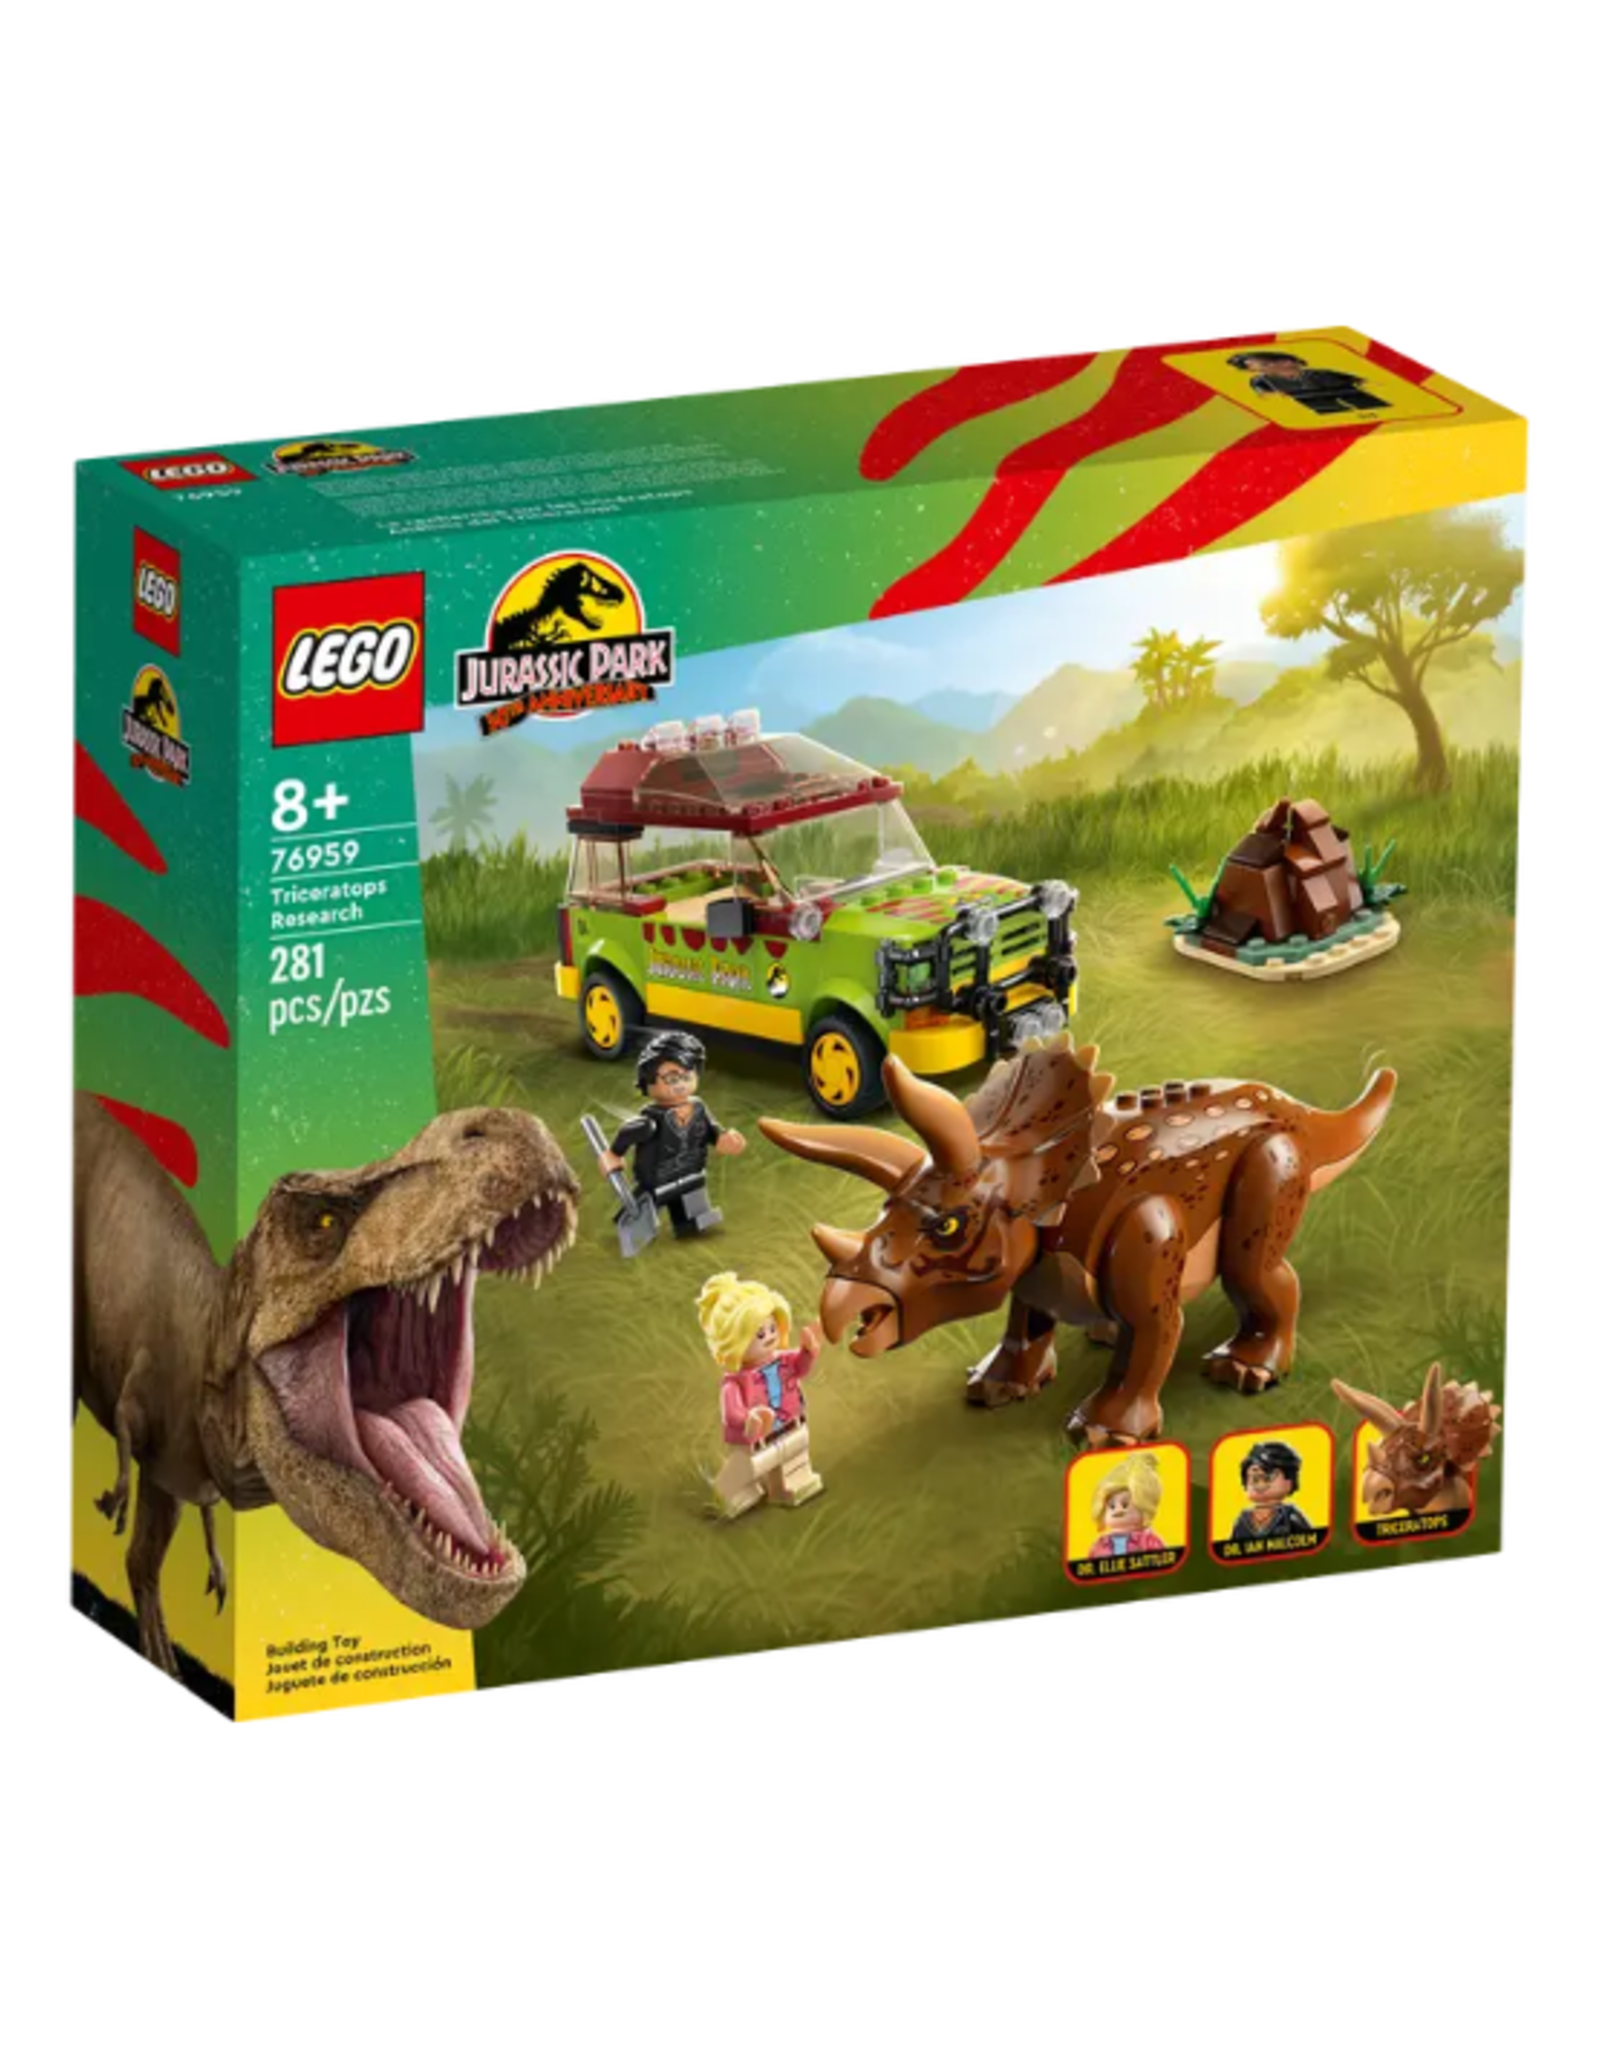  TOMY Games, Jurassic World Pop Up T-Rex, Dinosaur Game for  Kids, Family Game for Ages 4+ : Toys & Games